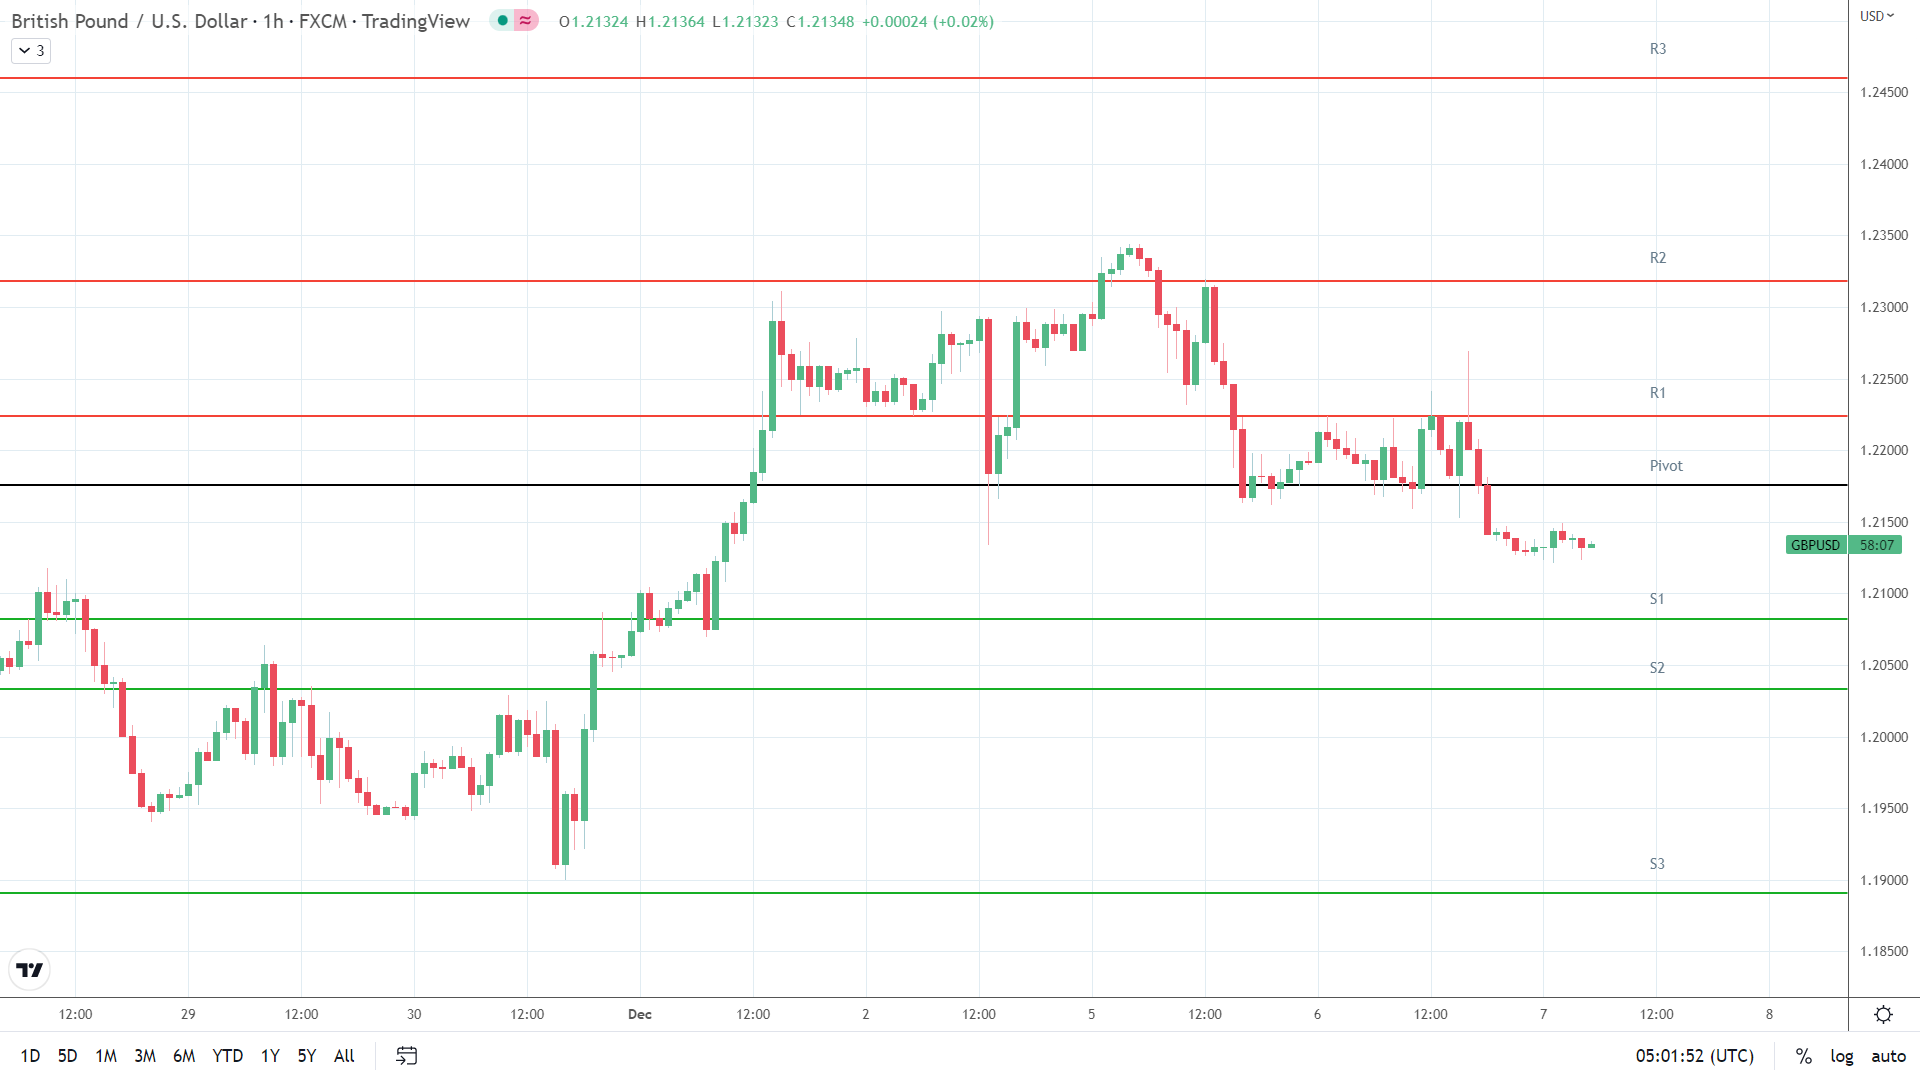 GBP to USD support levels in play below the pivot.